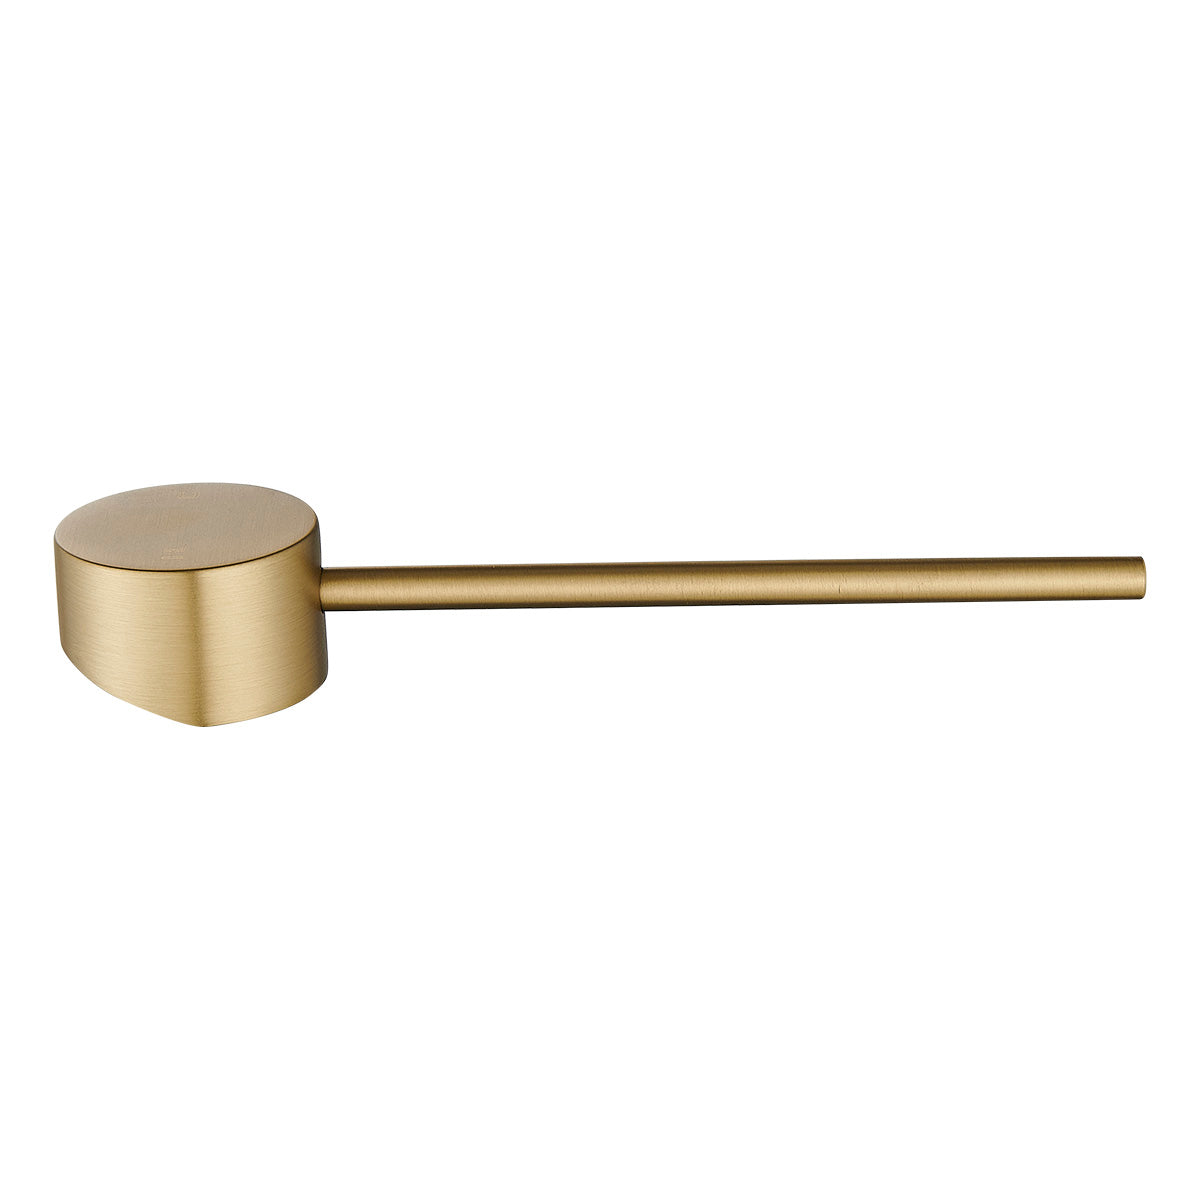 IDH5 (BG) / Ideal Disable Handle (Brushed Gold)